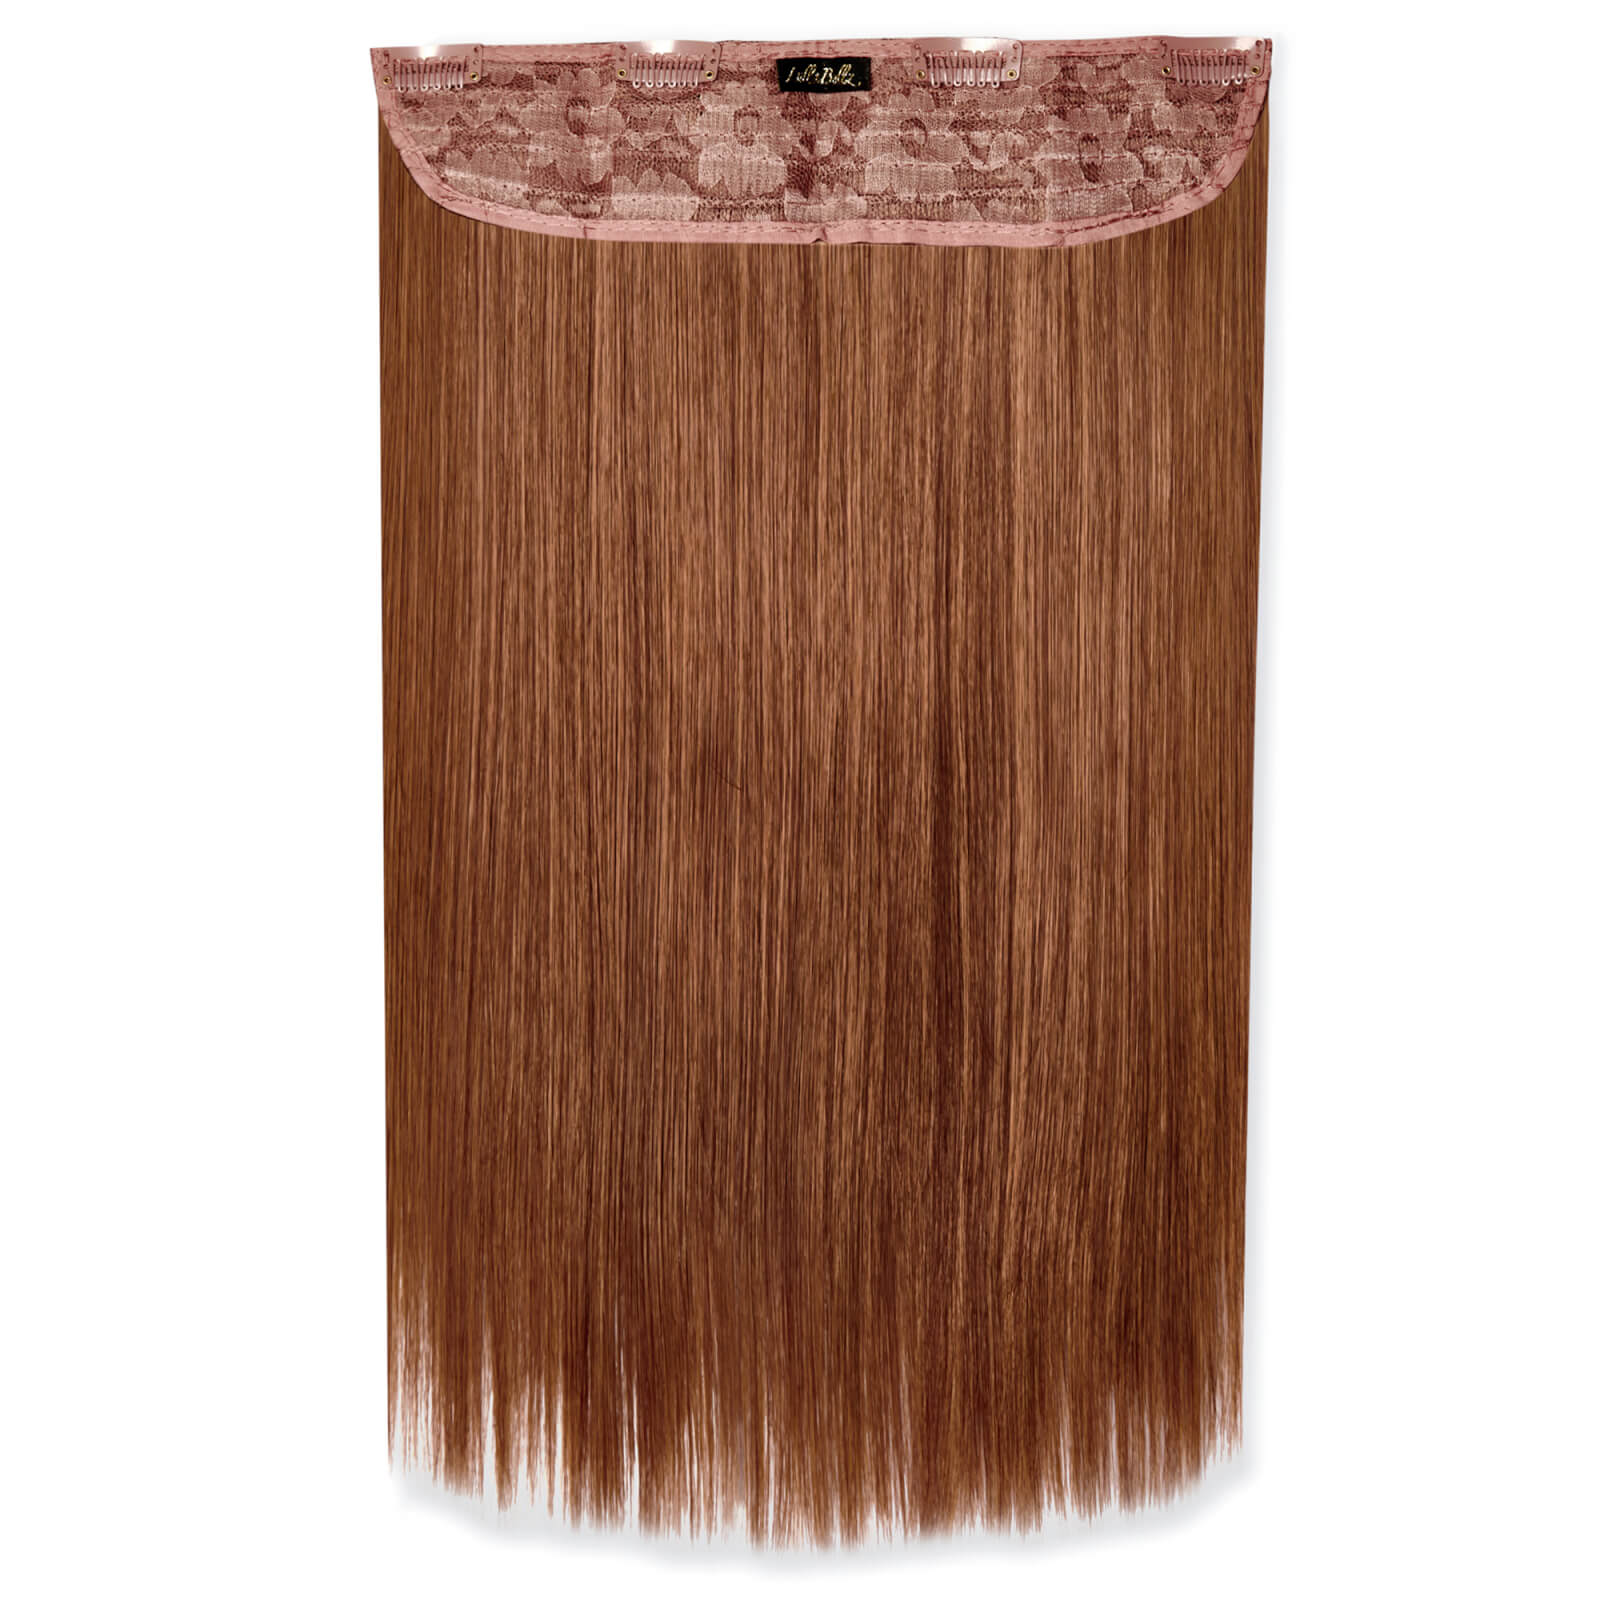 LullaBellz Thick 18 1-Piece Straight Clip in Hair Extensions (Various Colours) - Mixed Auburn